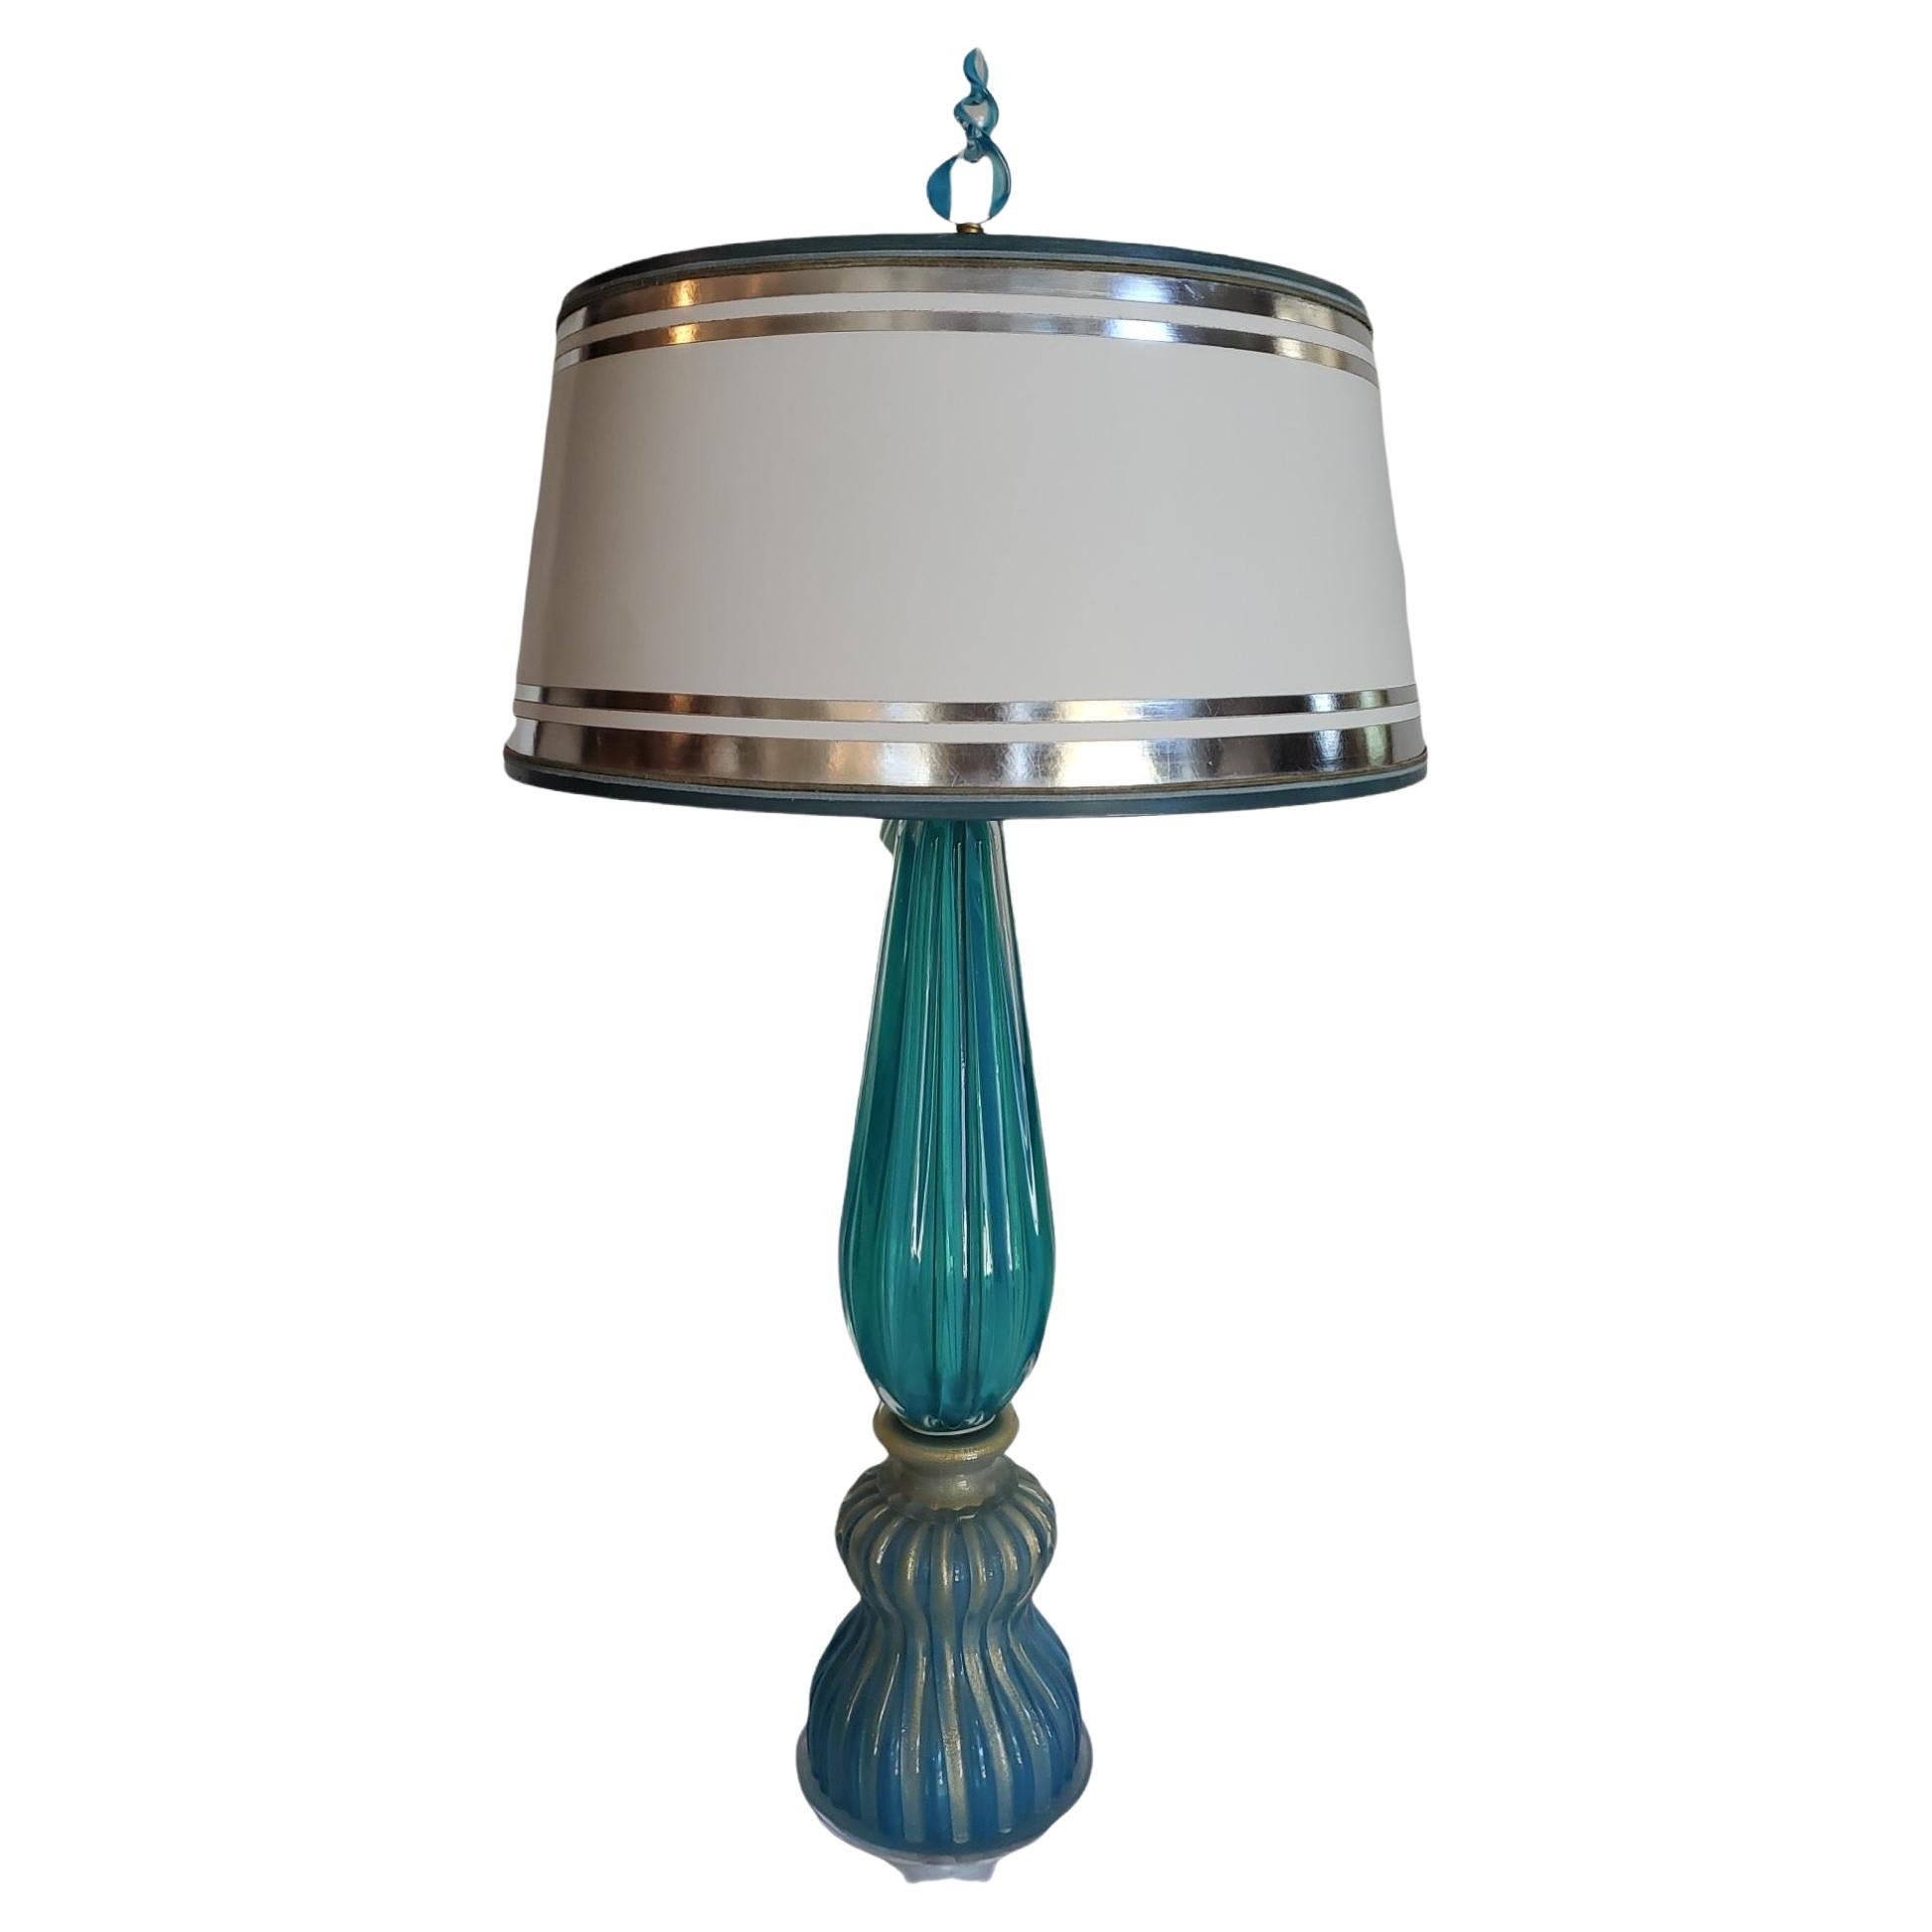 Vintage 1960s Turquoise Murano Lamp For Sale